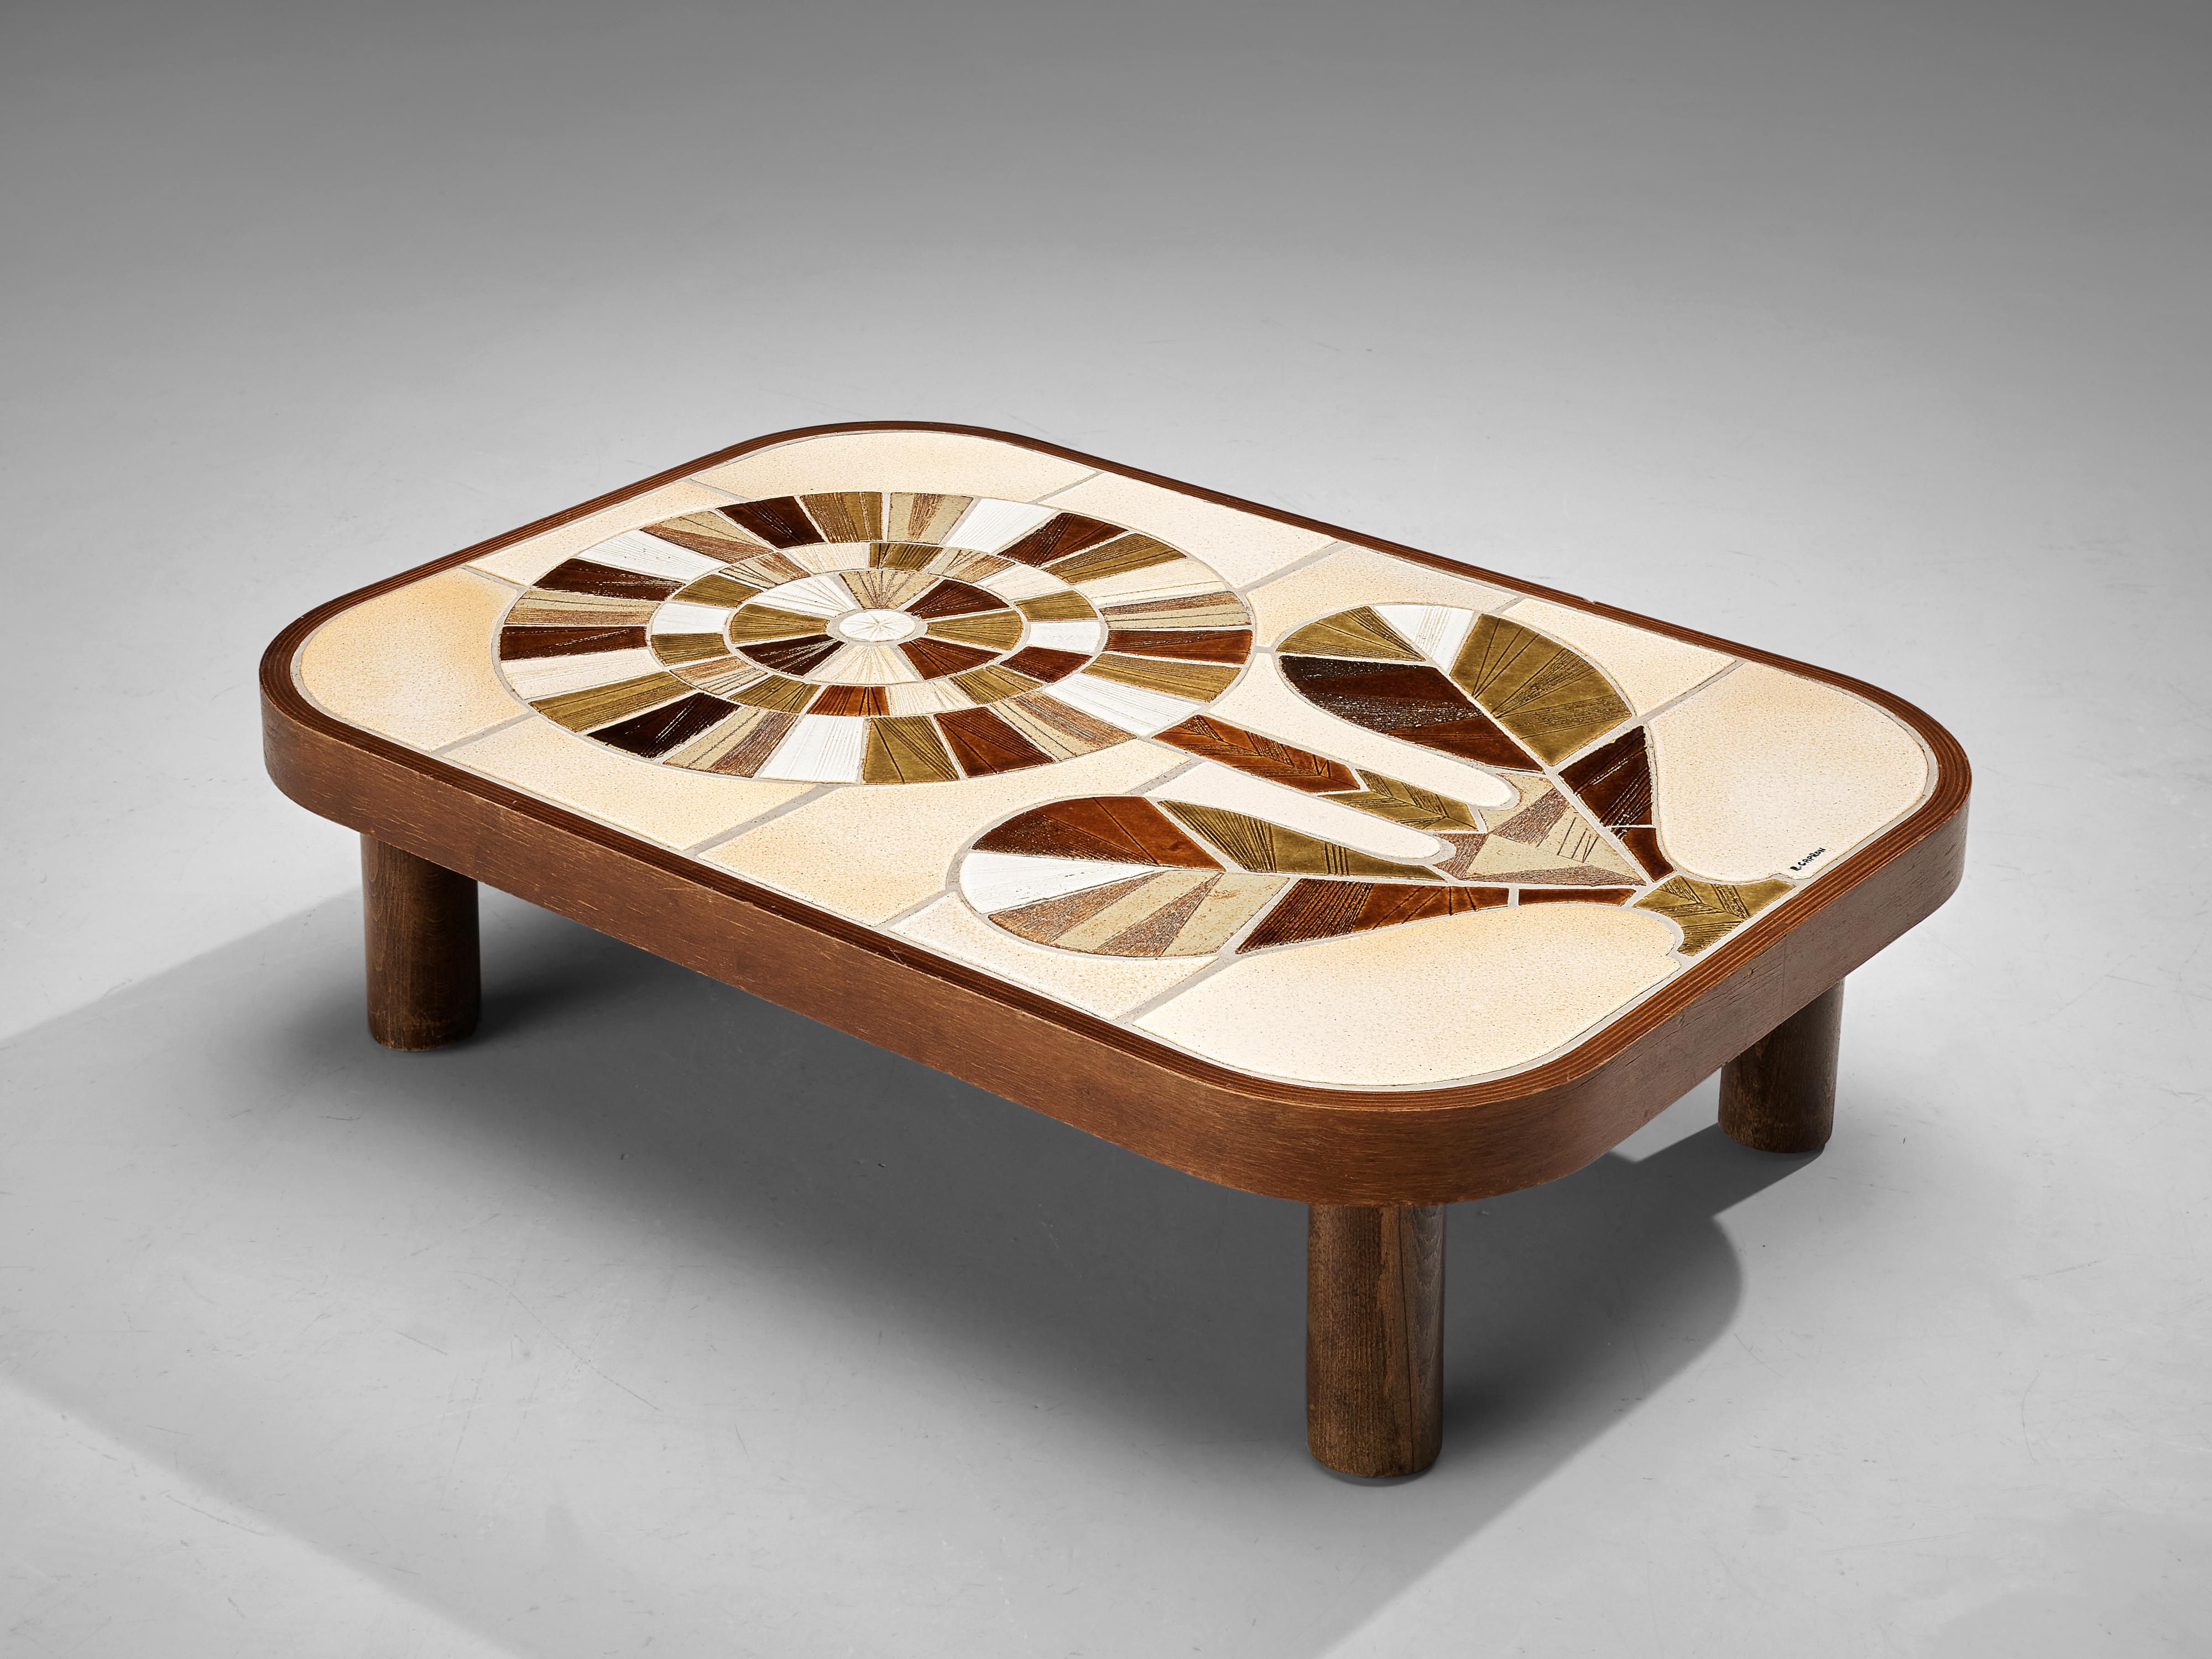 Roger Capron, coffee table, ceramic, wood, France, 1960s 

French coffee table with wonderful composed ceramic tiles by French ceramic artist Roger Capron. It features a vibrant motif of a flower created by differently colored fragments. A